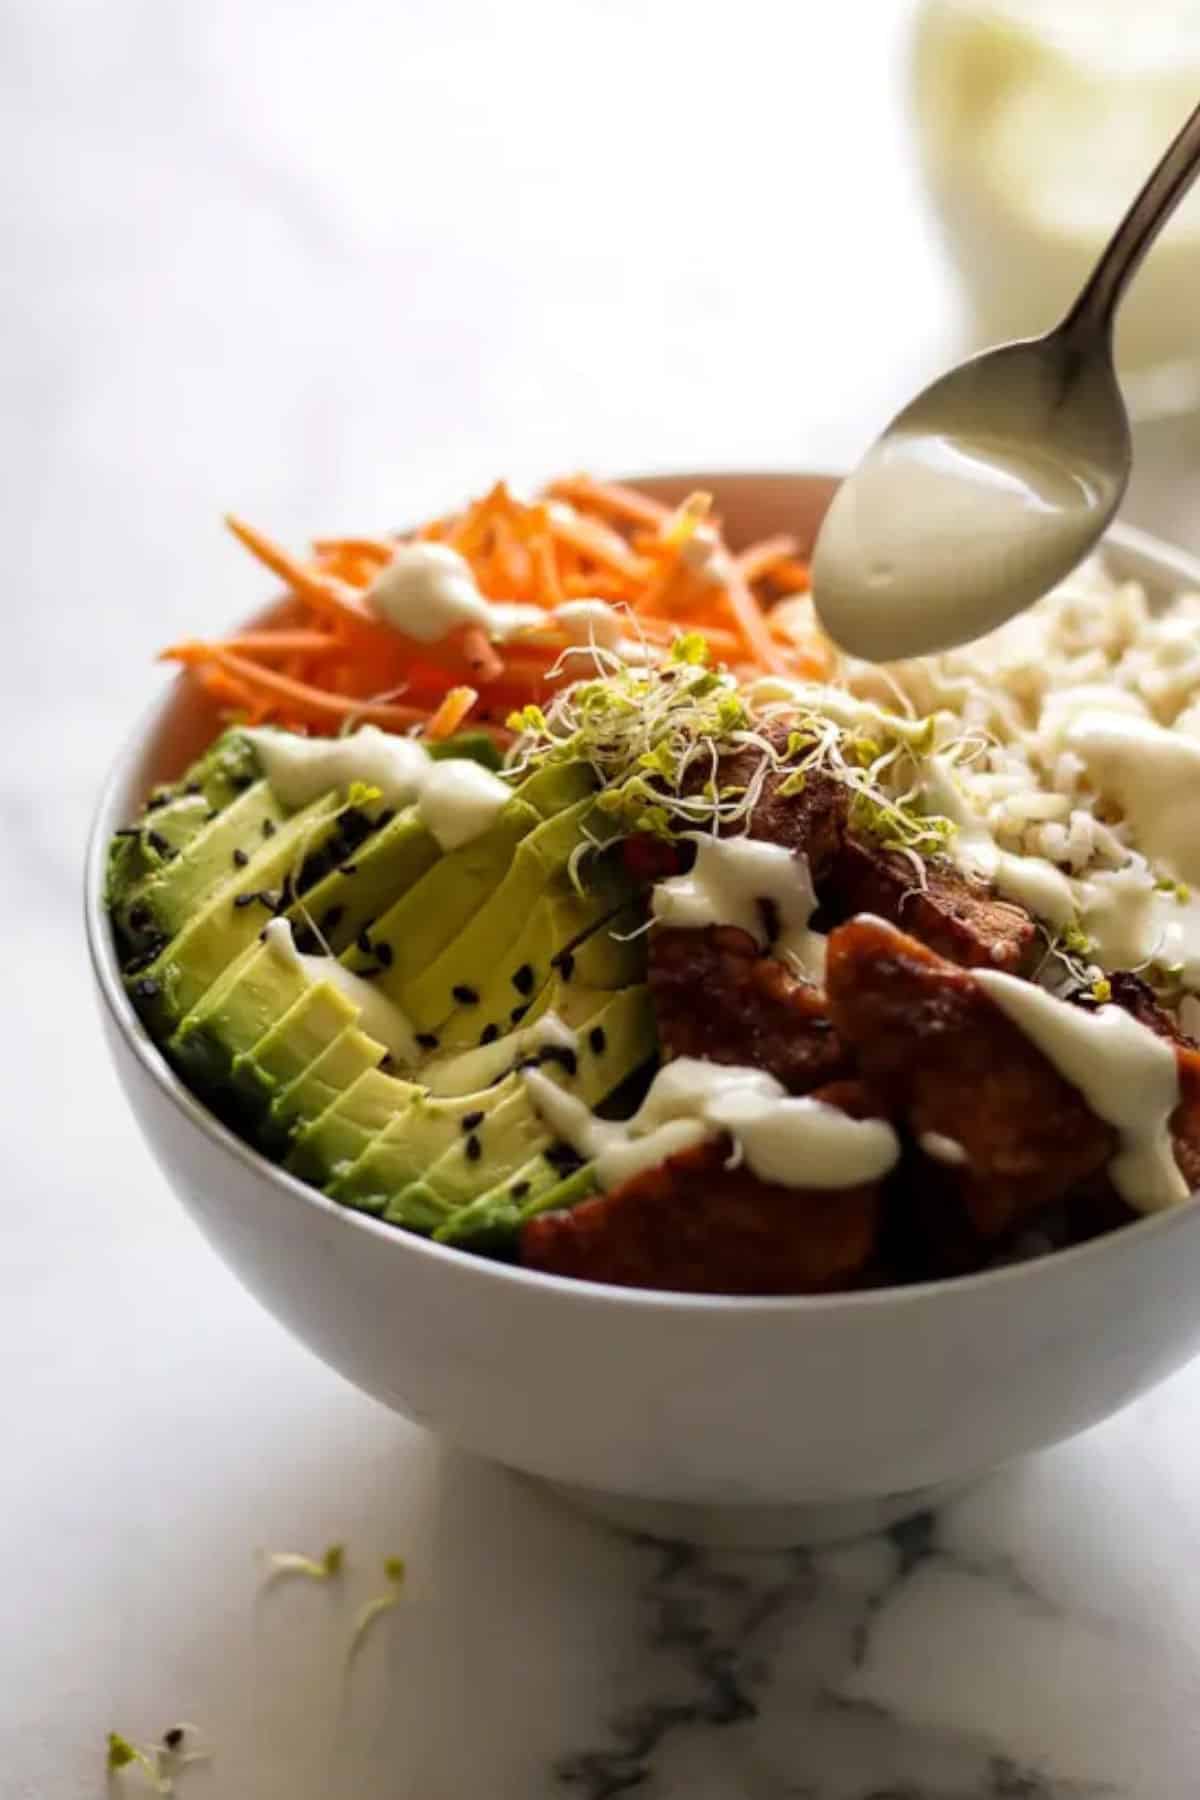 Spooning dressing over a rice bowl with chicken, avocado, rice, and carrots.